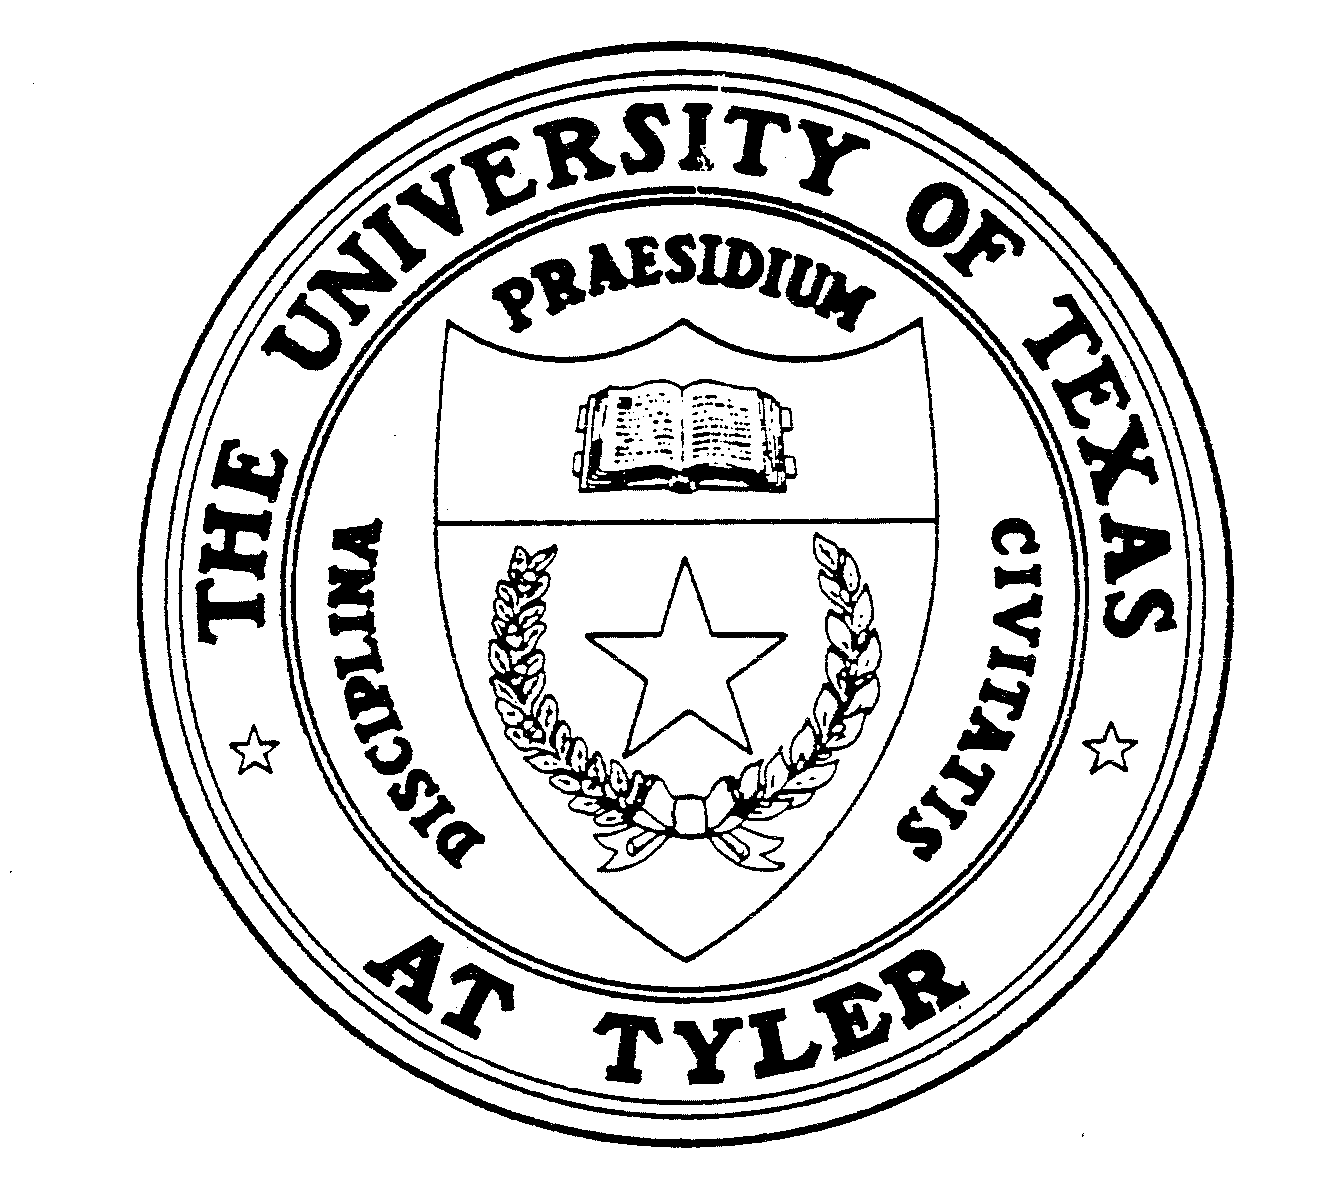  THE UNIVERSITY OF TEXAS AT TYLER